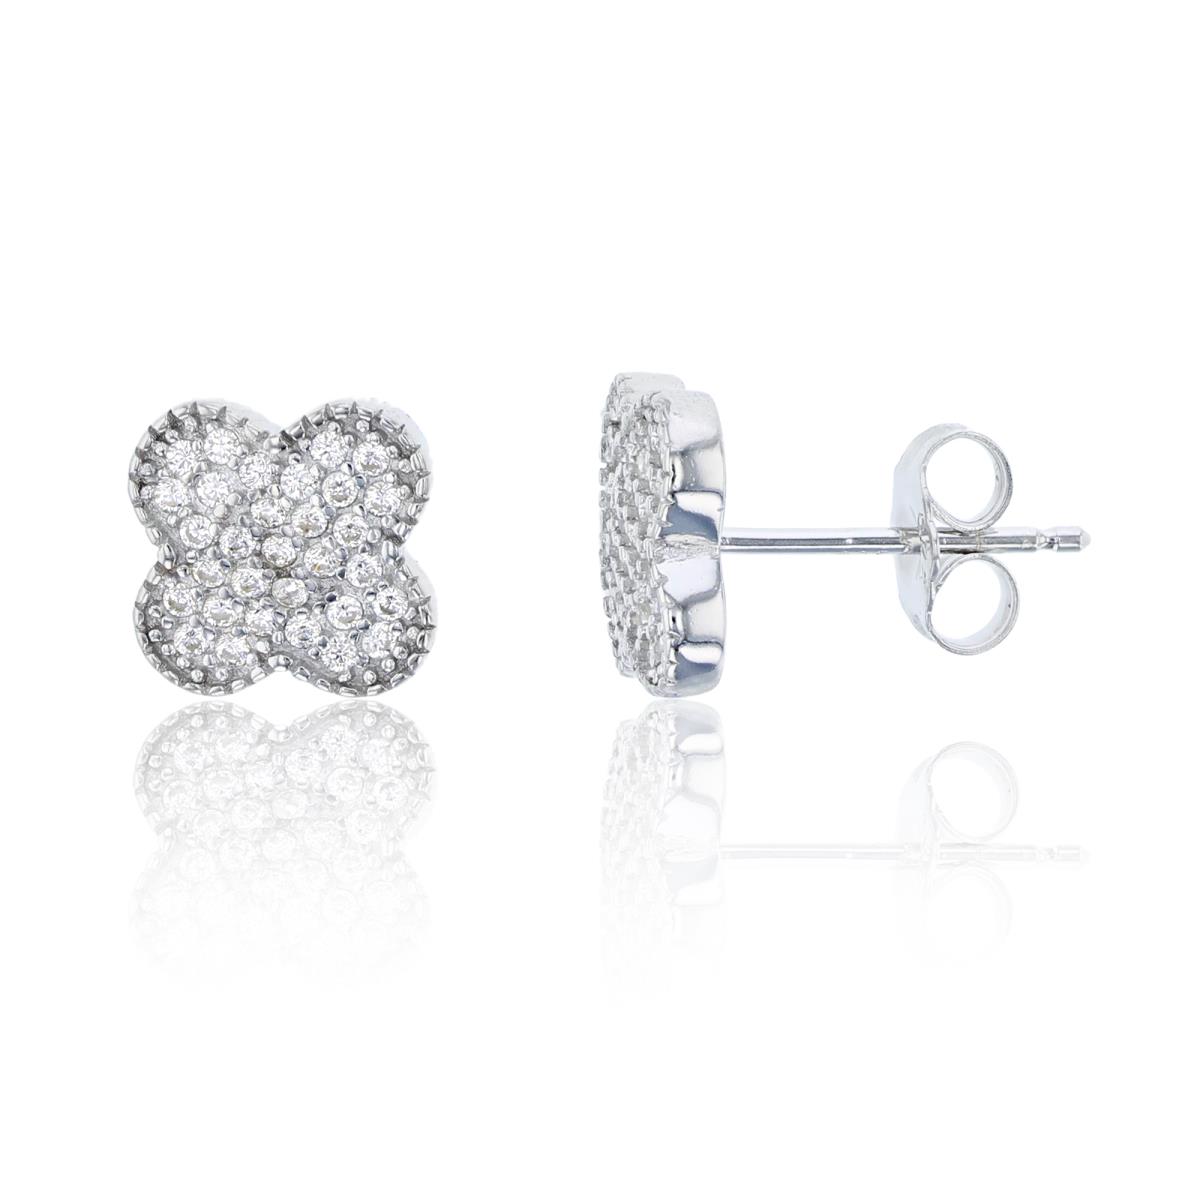 Sterling Silver Micropave Clover Stud Earring